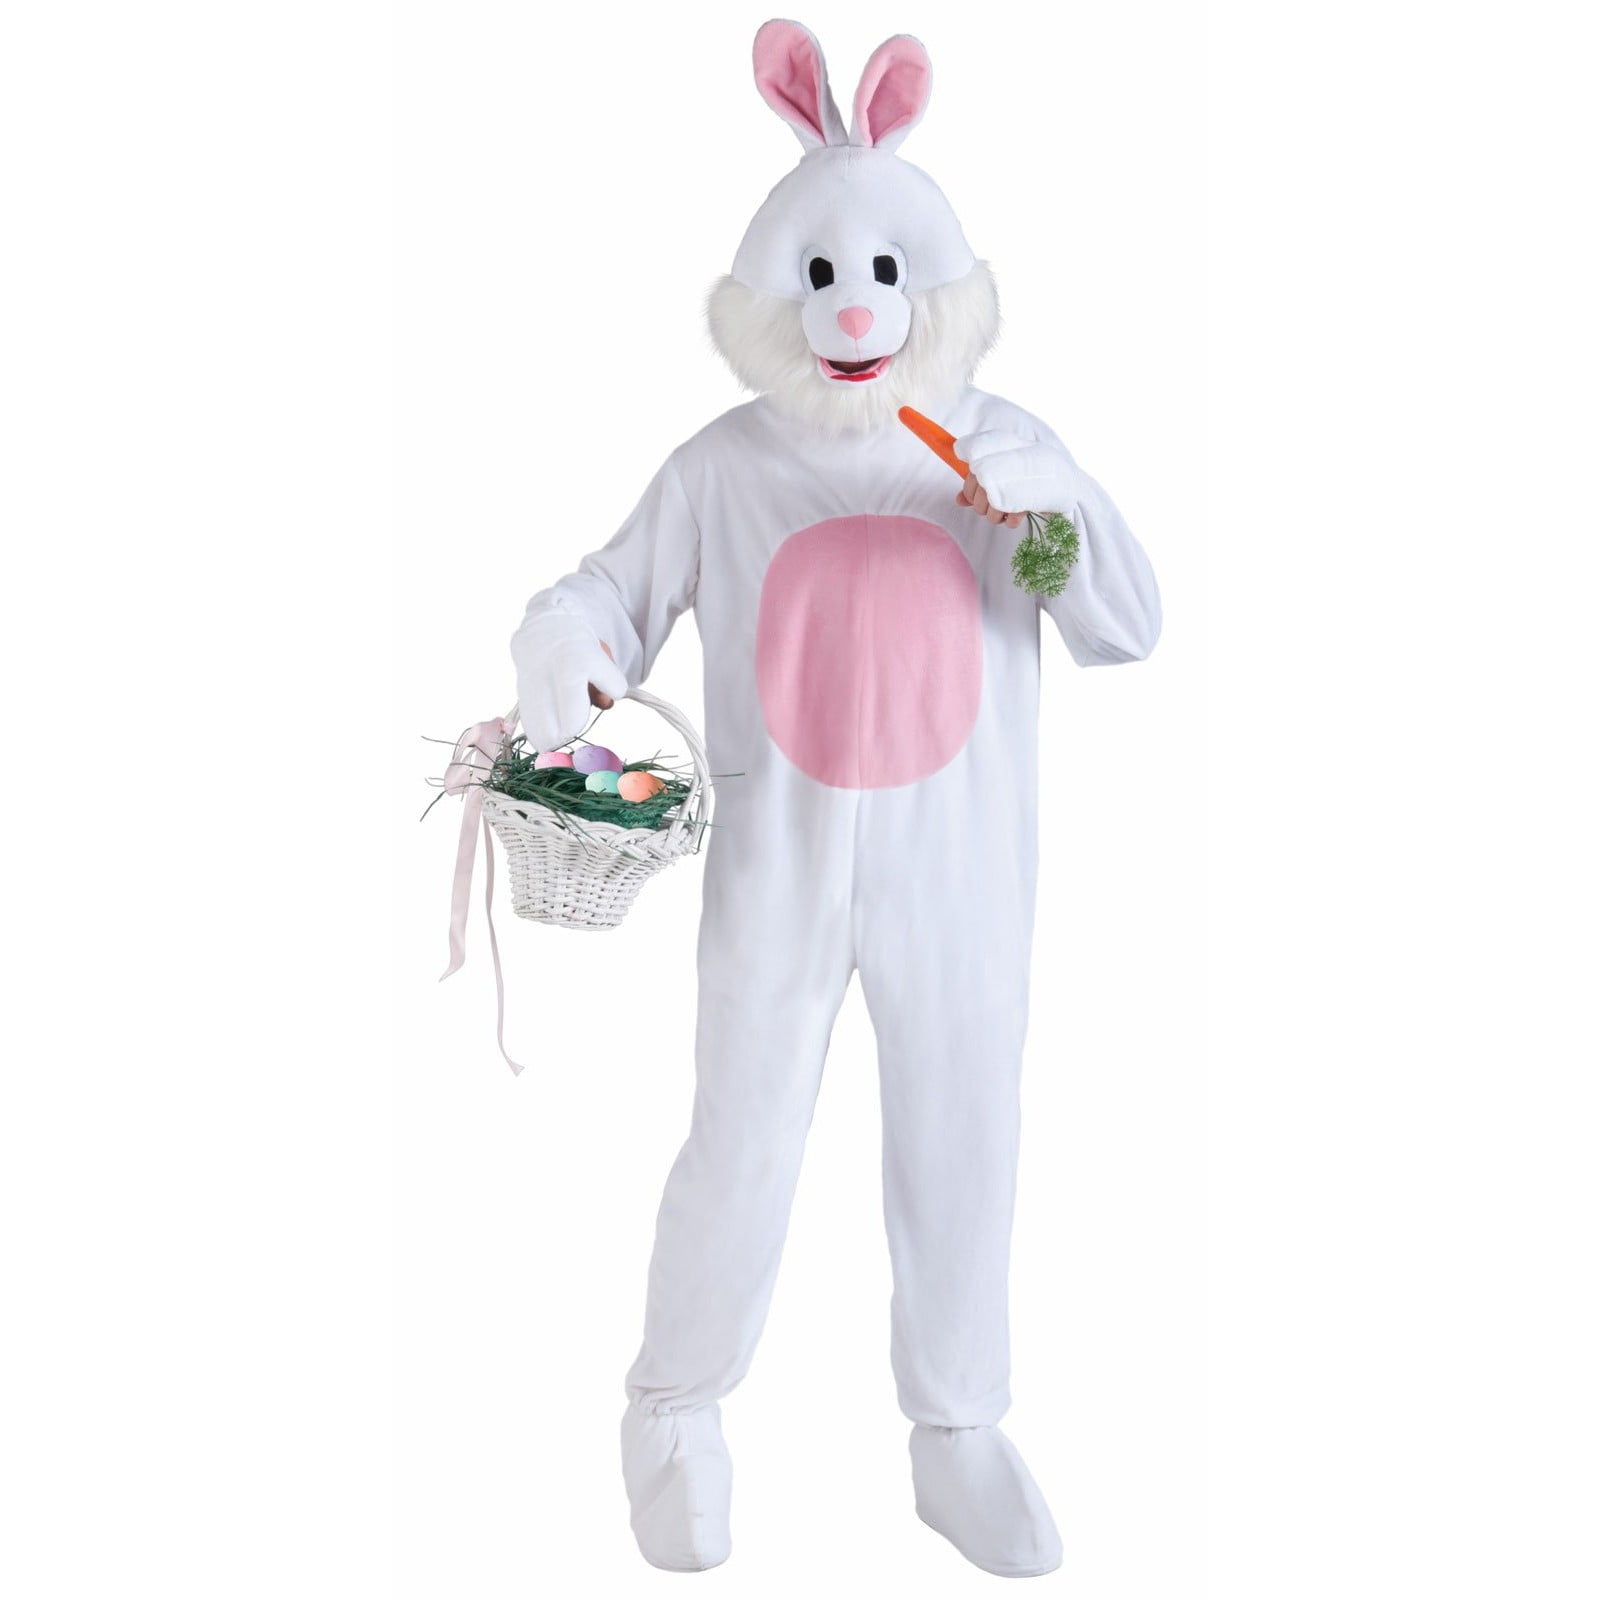 Details about   Easter Rabbit Mascot Costume suits Rabbit Cosplay Fancy Dress Outfit Adults size 